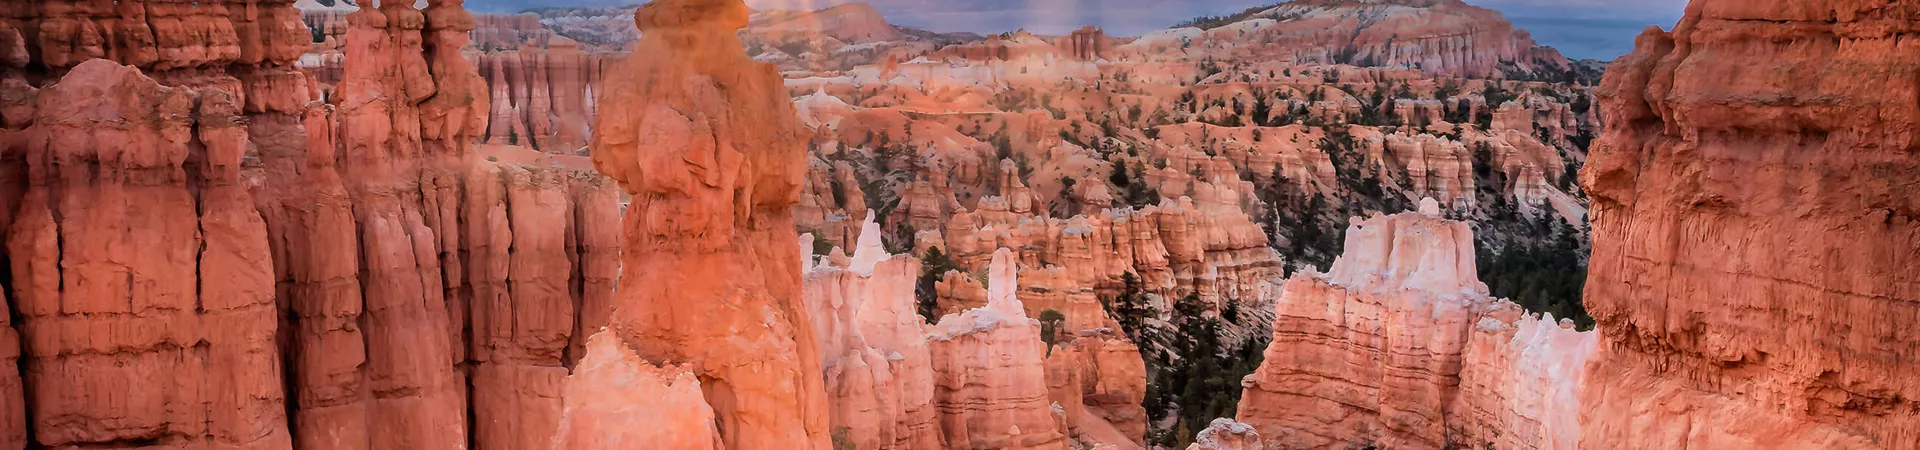 Bryce Canyon in Utah by sunset